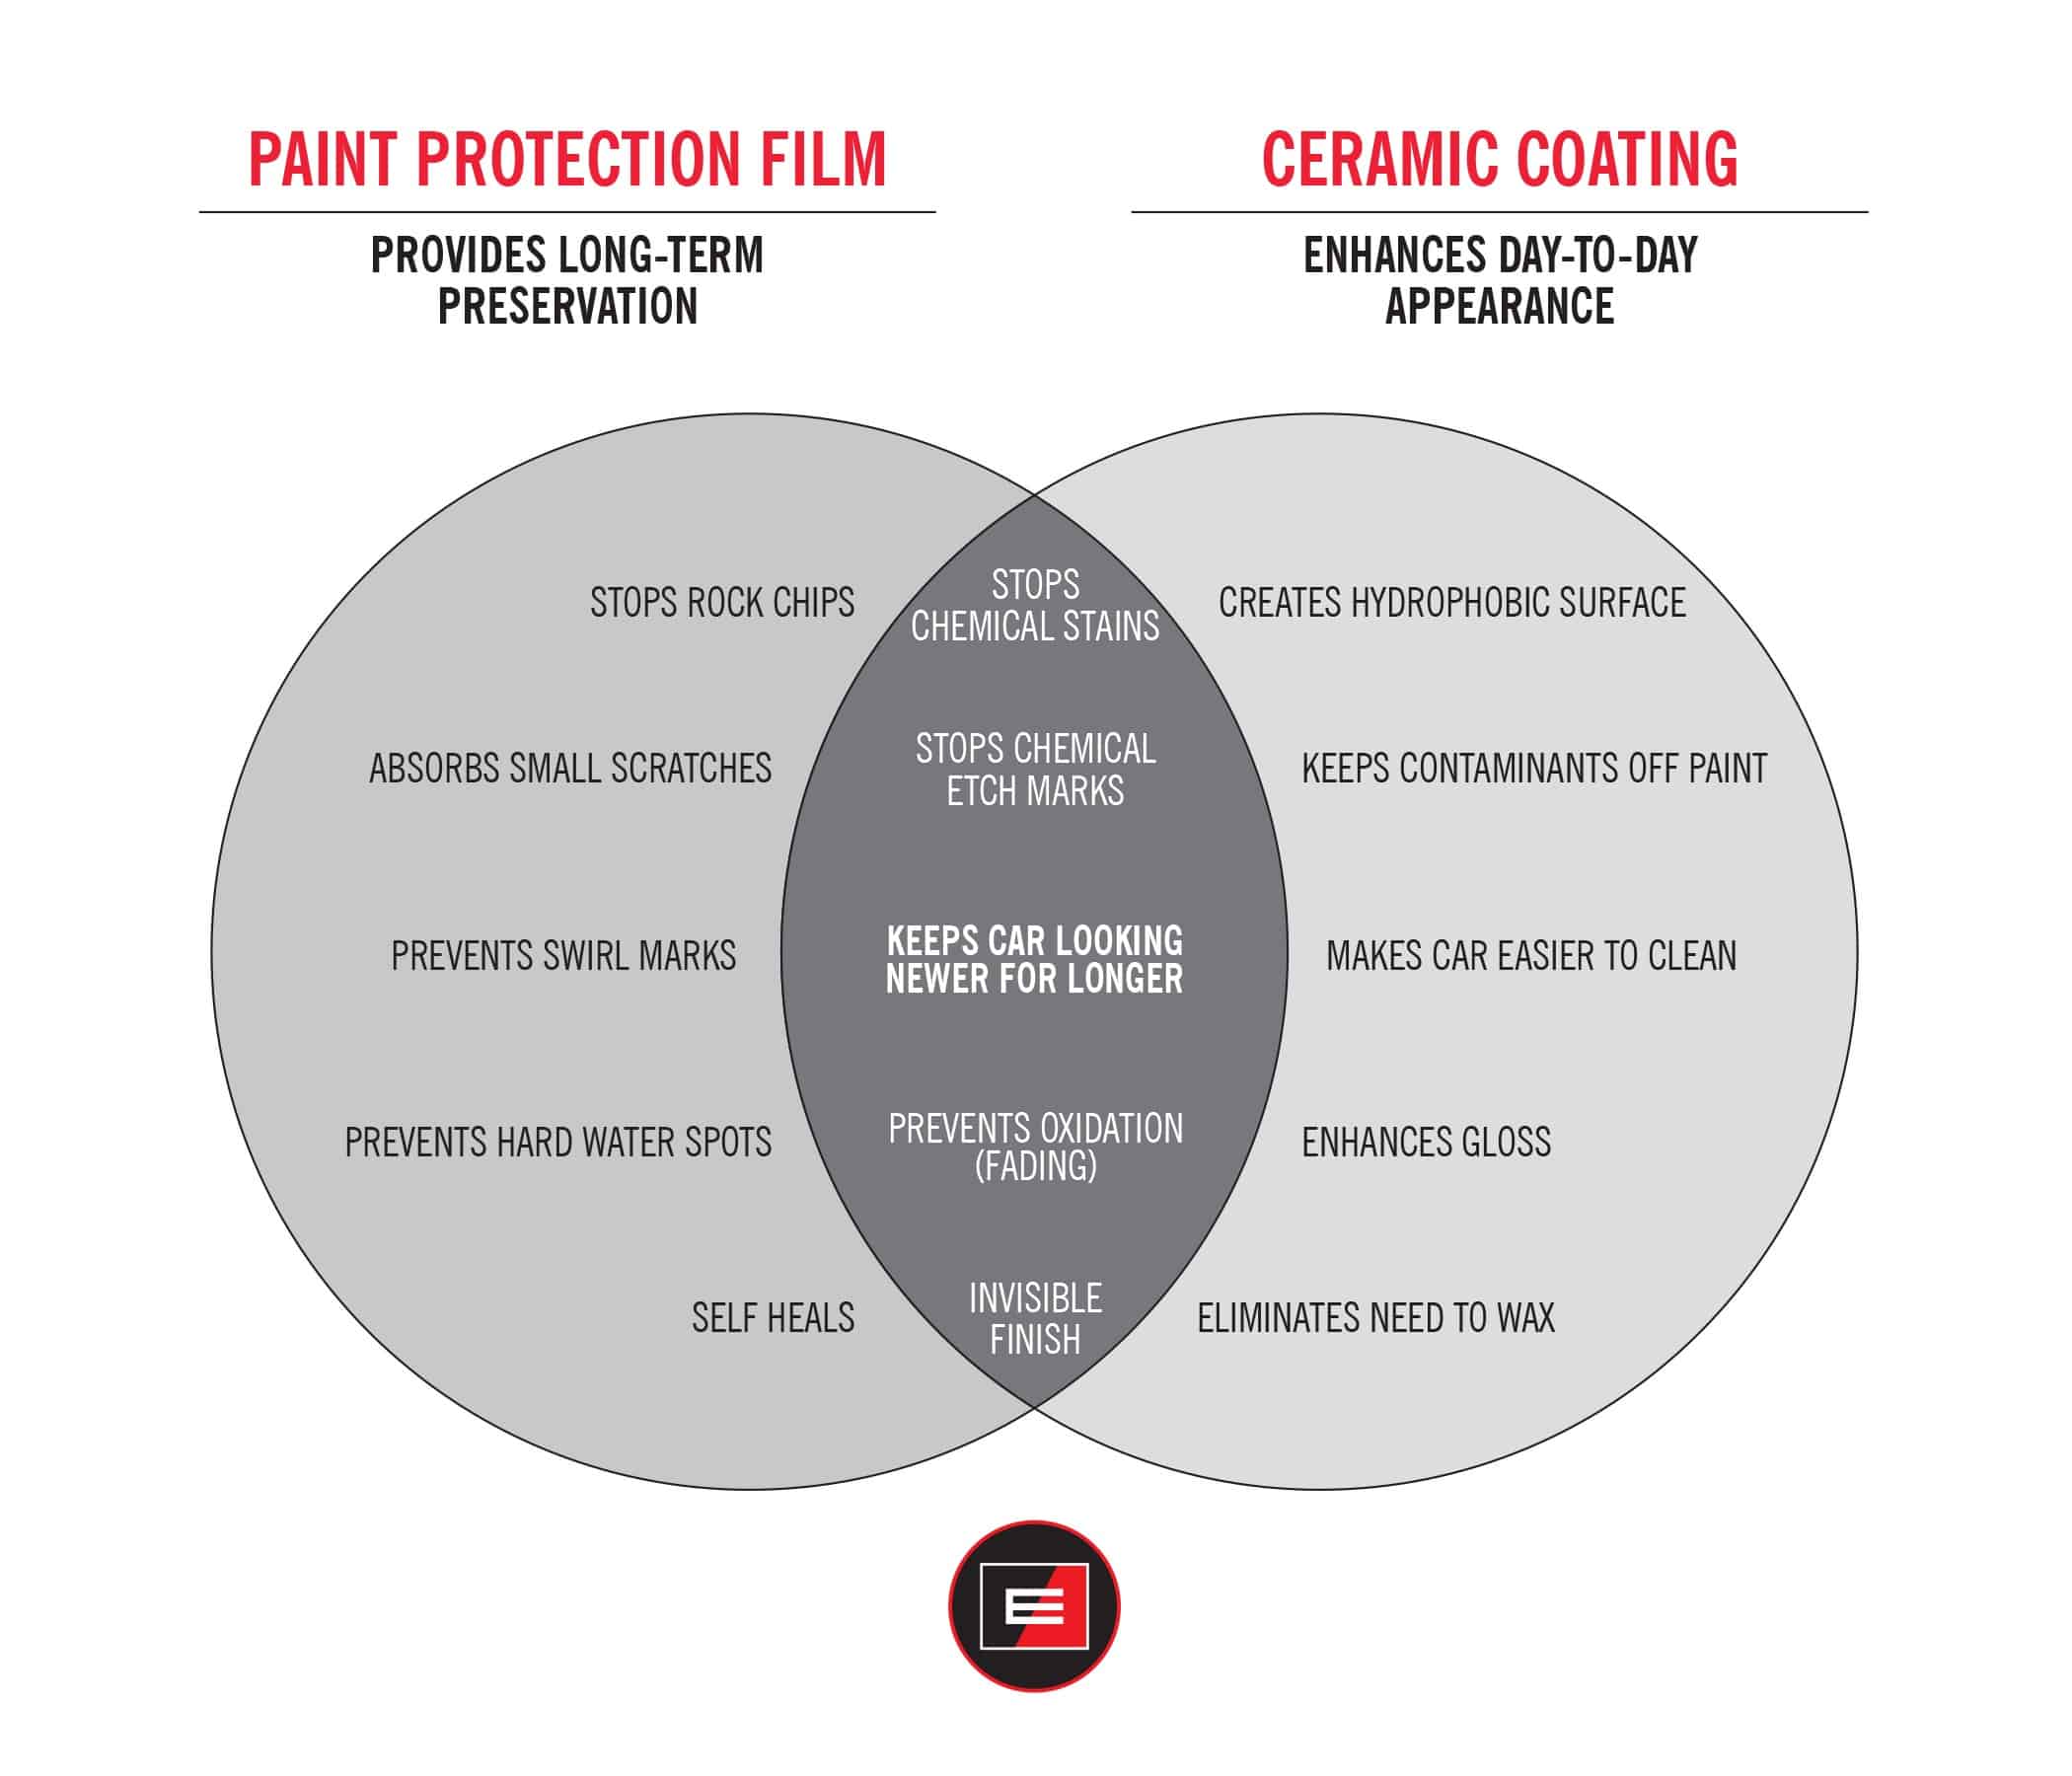 Ceramic Coating vs Paint Protection: Which Is Better for Your Car